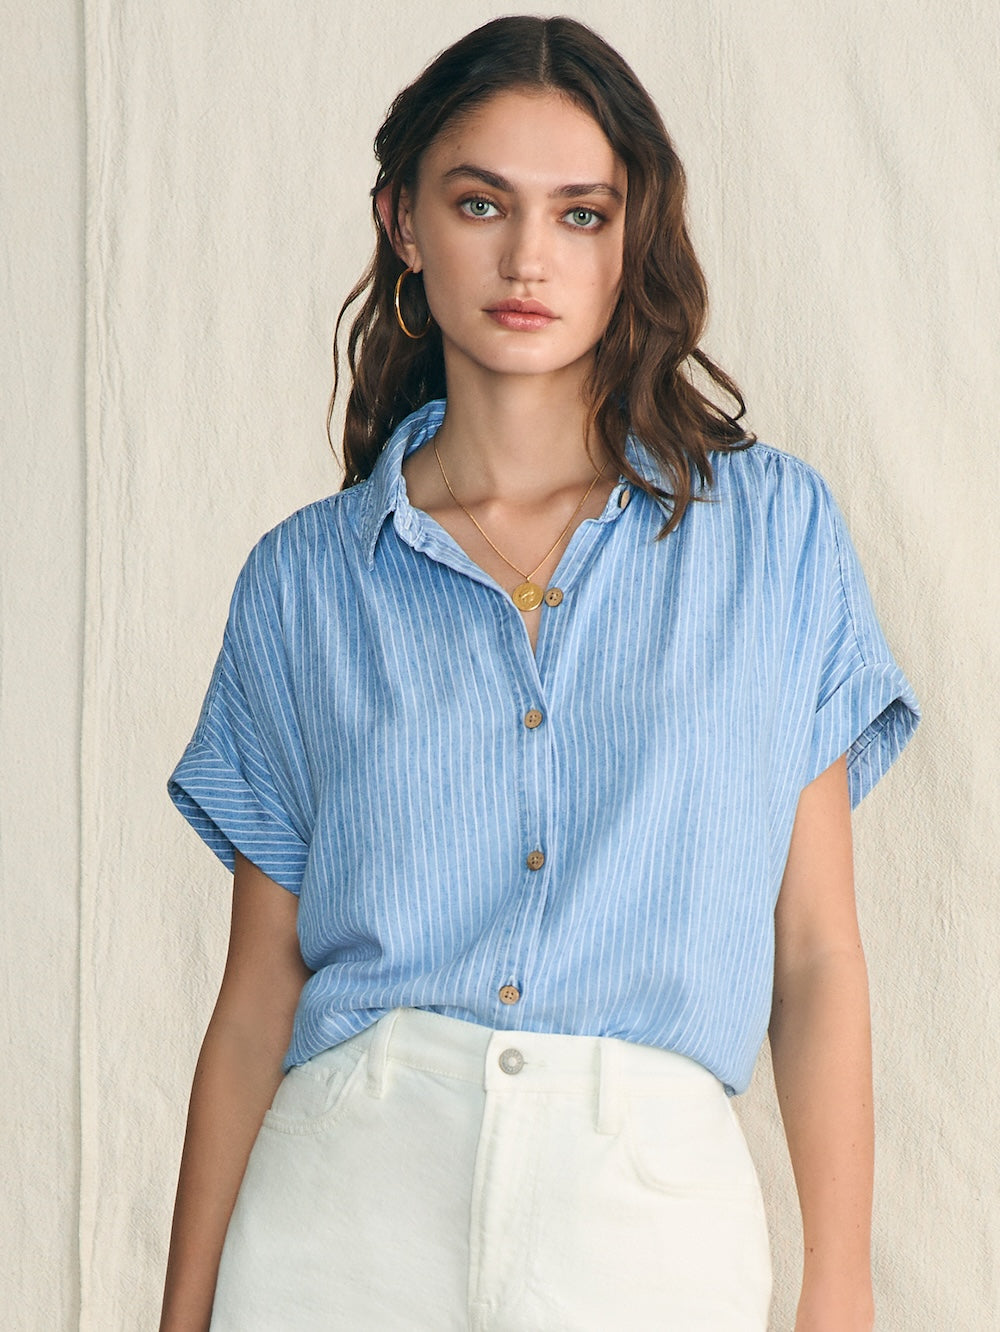 Women's Blouses, Shirts & Tops | Faherty Brand